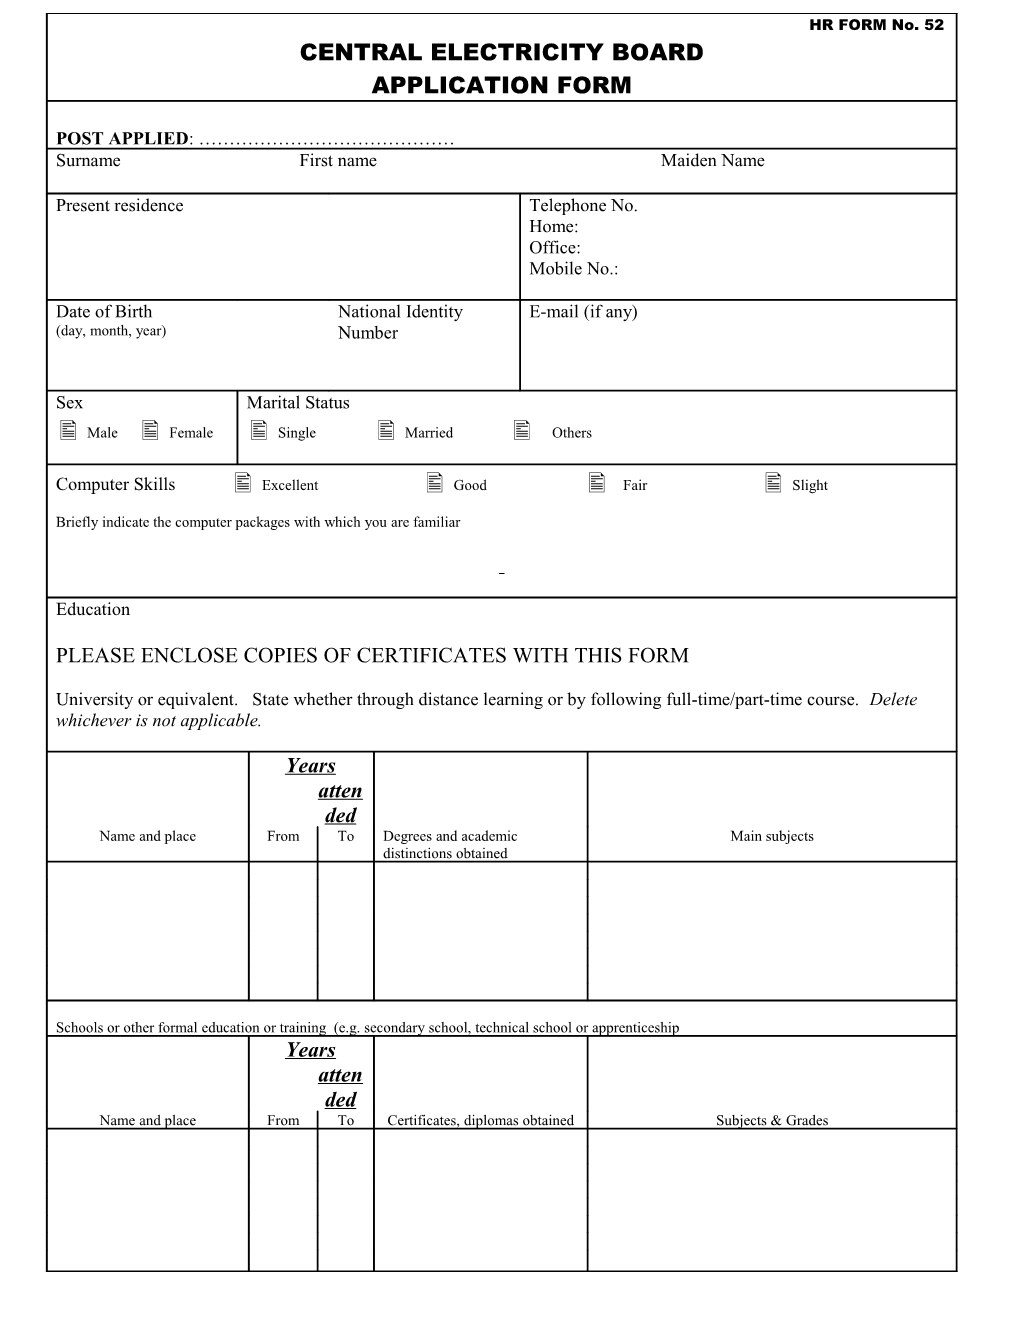 Please Enclose Copies of Certificates with This Form